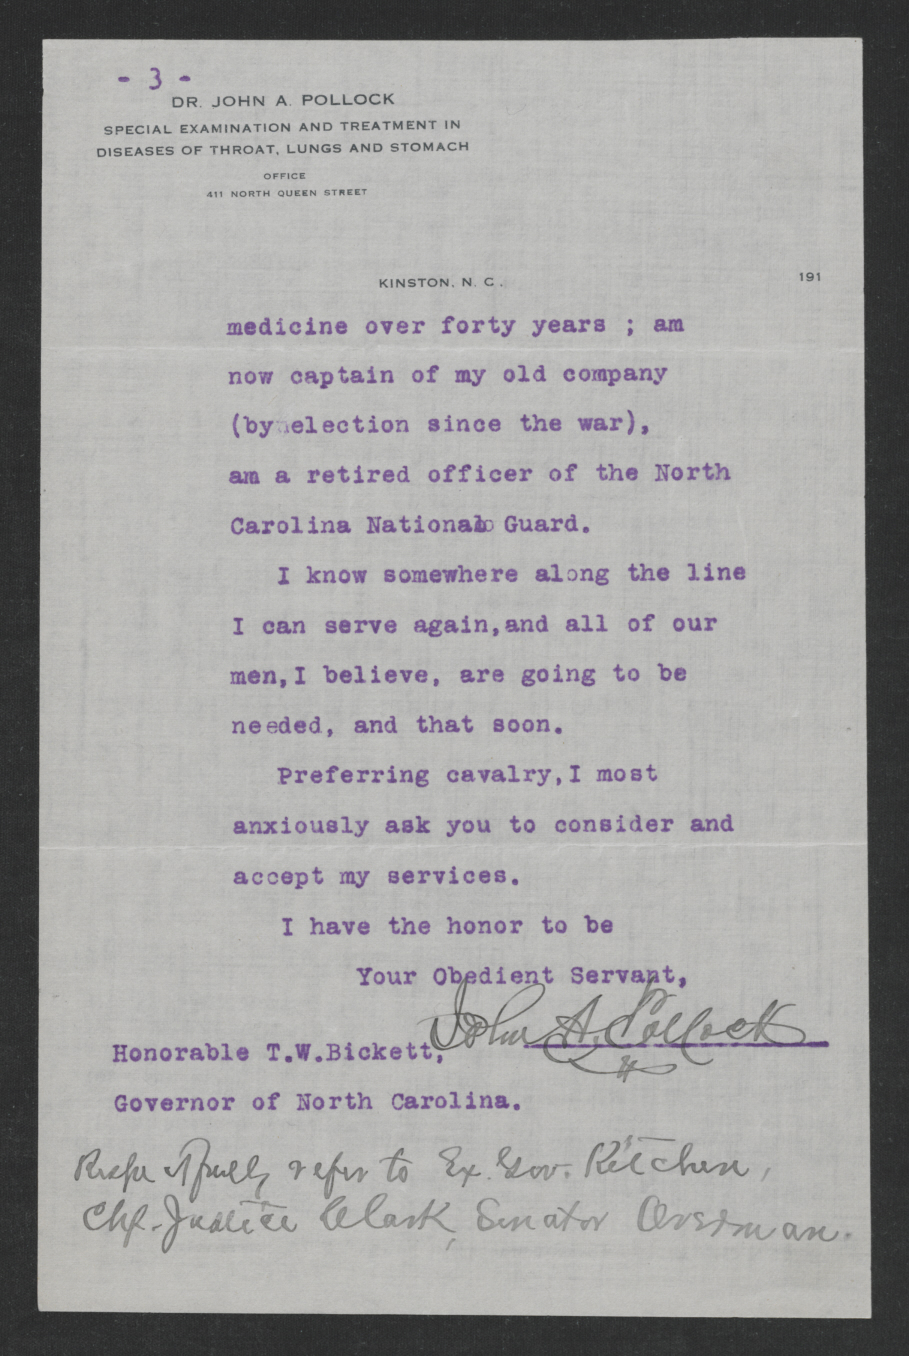 Letter from John A. Pollock to Thomas W. Bickett, December 15, 1917, page 3